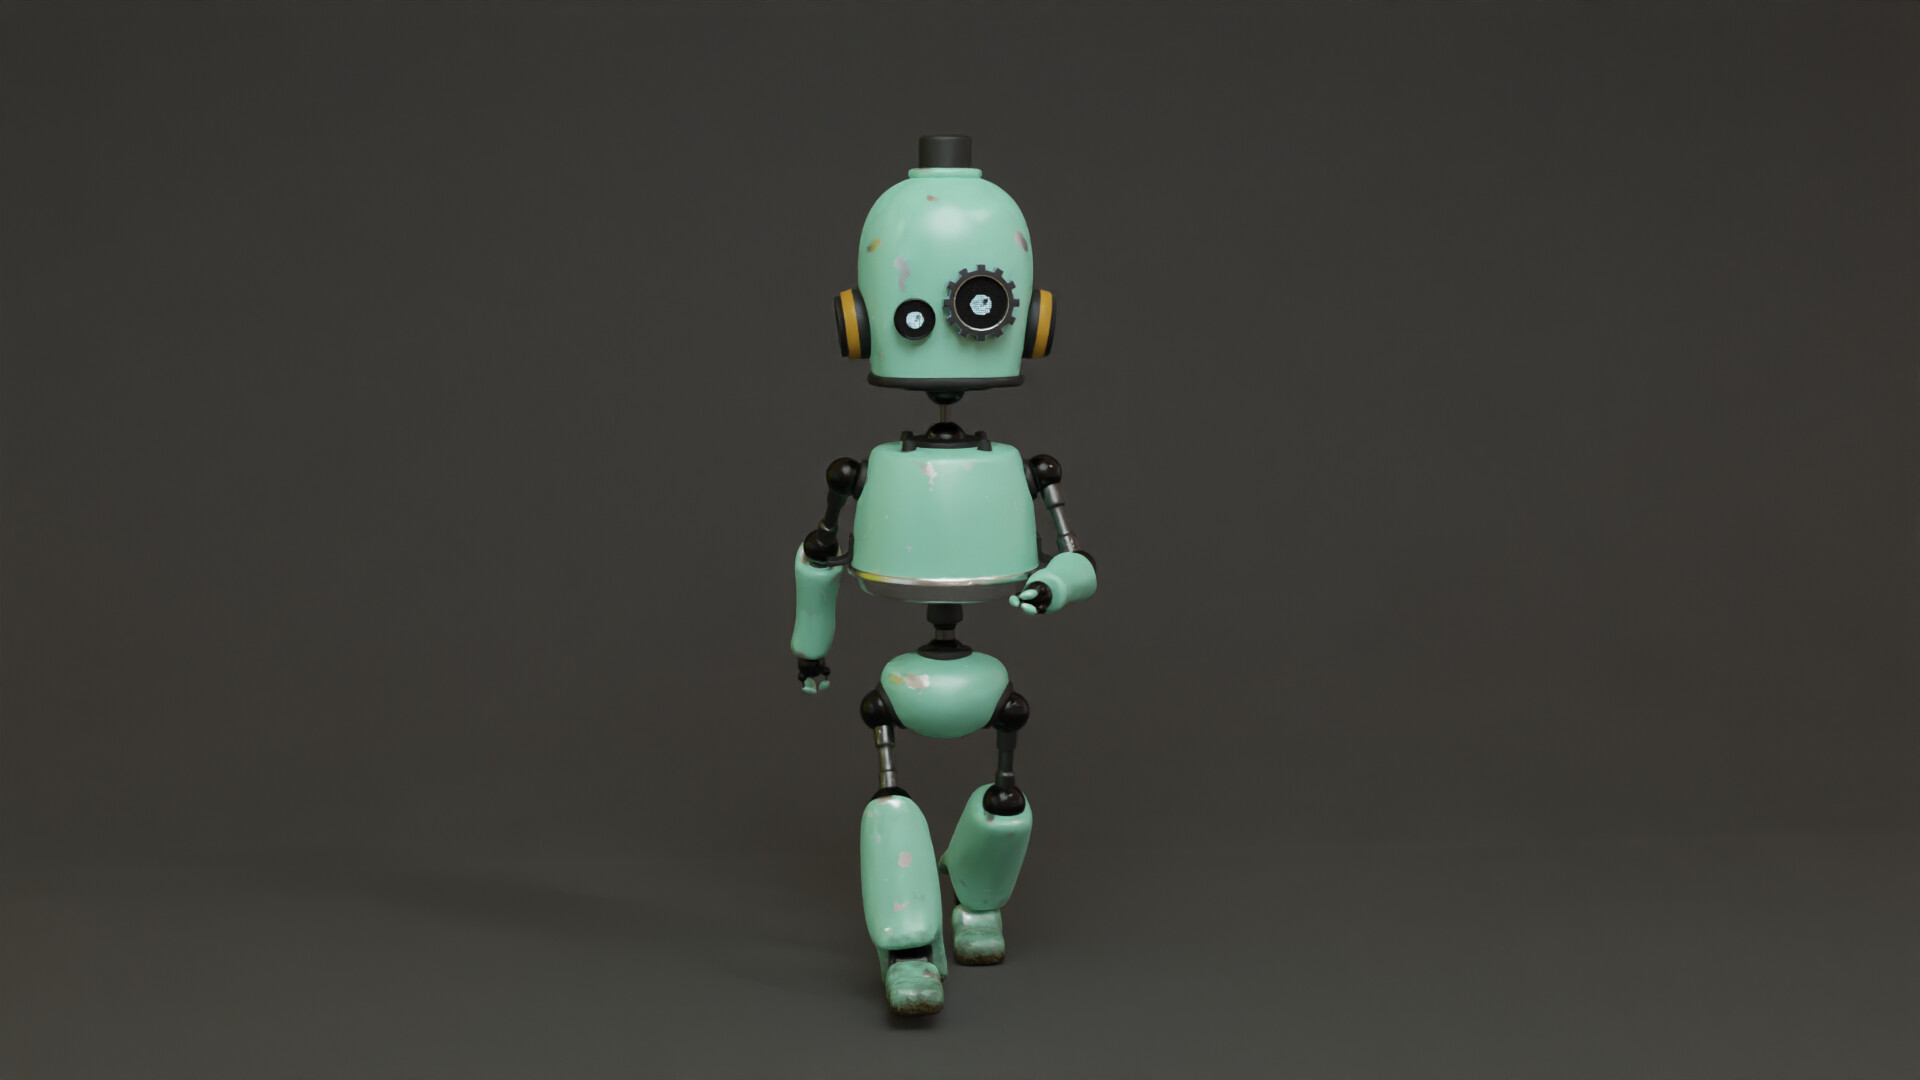 A Simple Robot Walk Cycle - Animations - Blender Artists Community